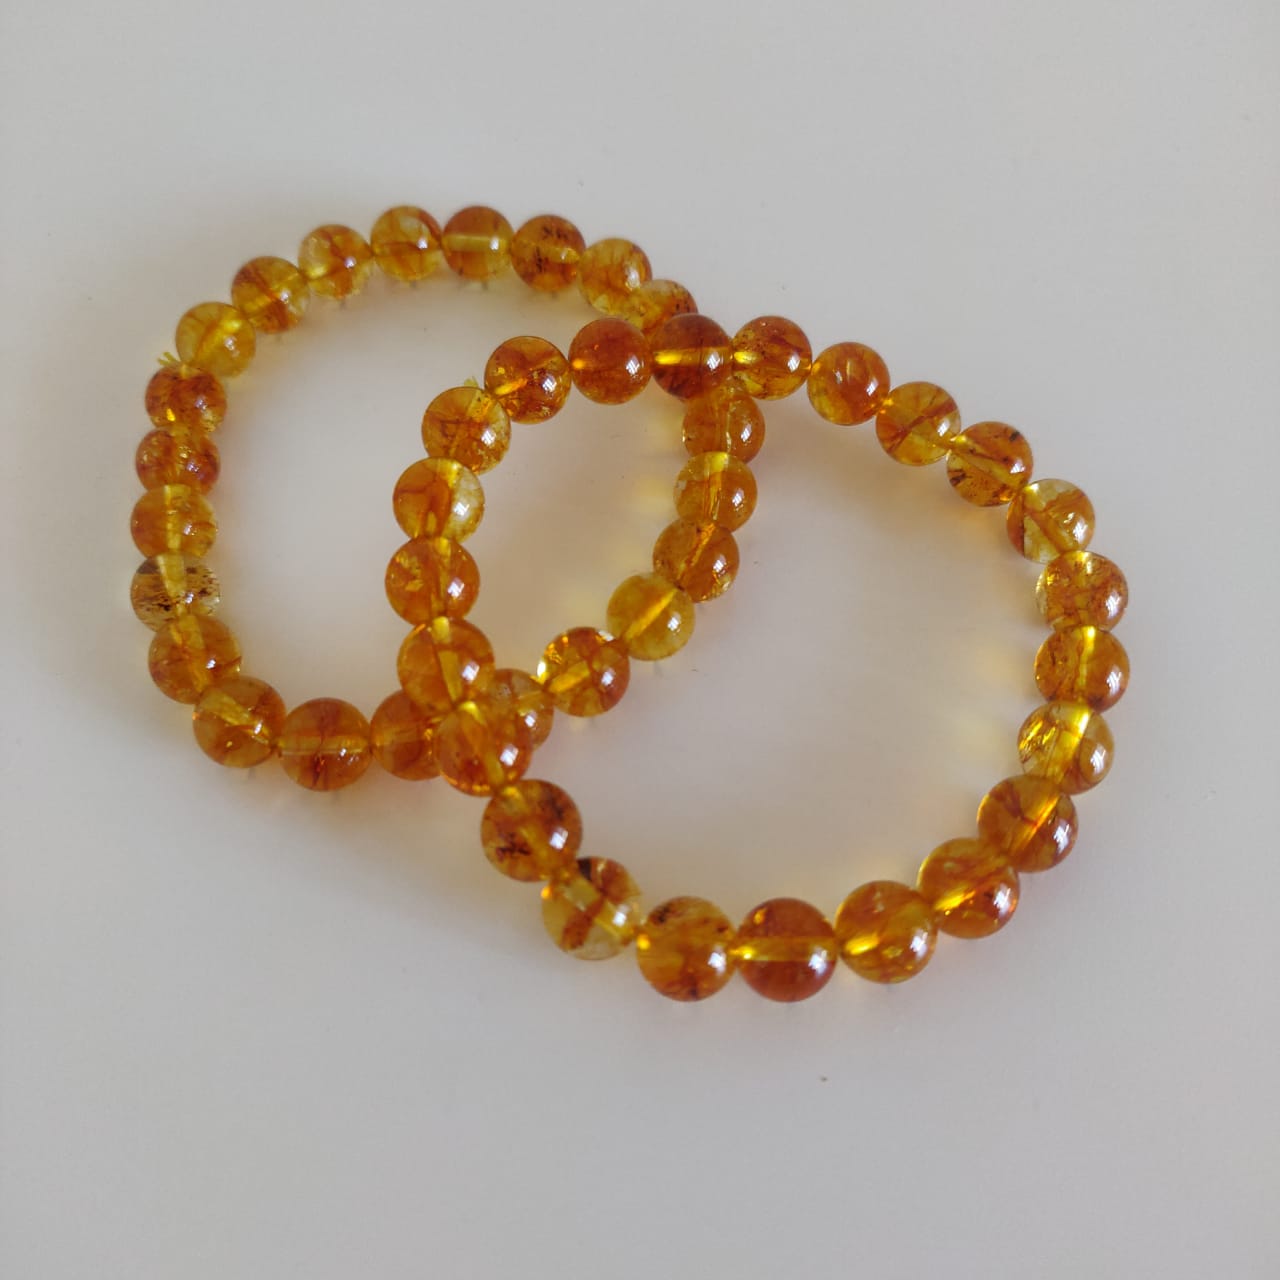 Astrological benefits of citrine stone – Crystal Agate